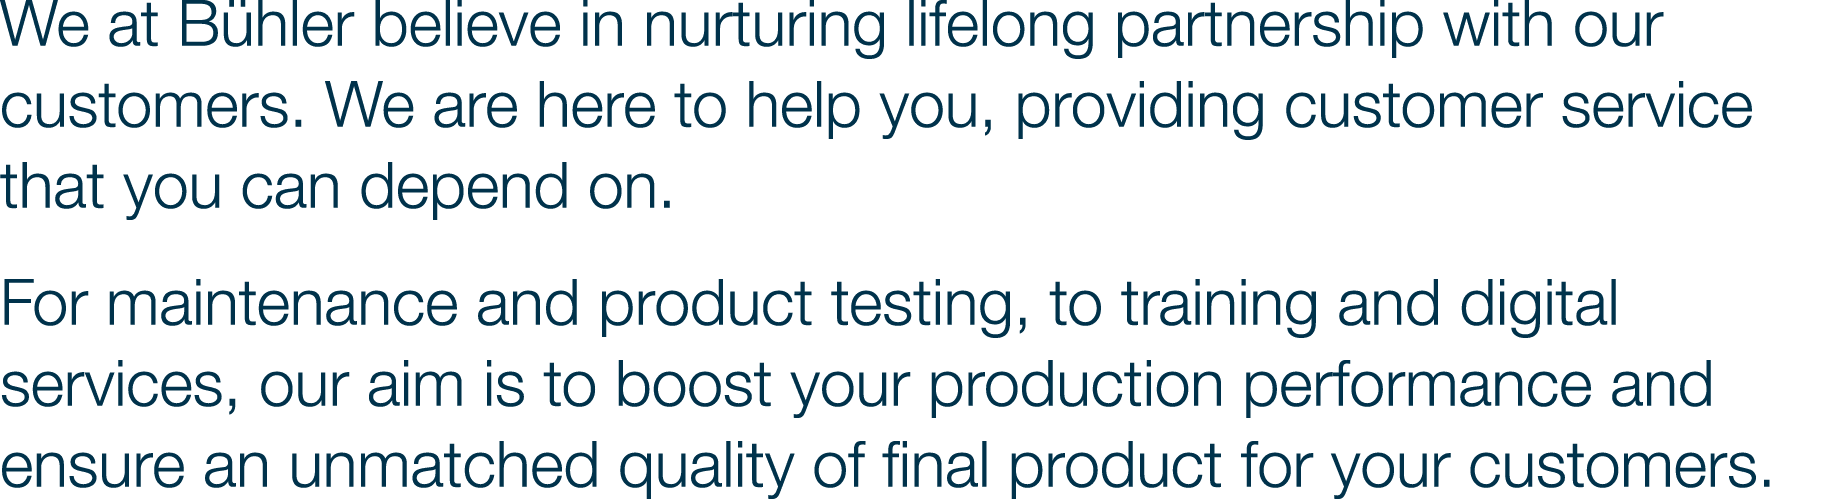 We at Bühler believe in nurturing lifelong partnership with our customers  We are here to help you, providing custome   